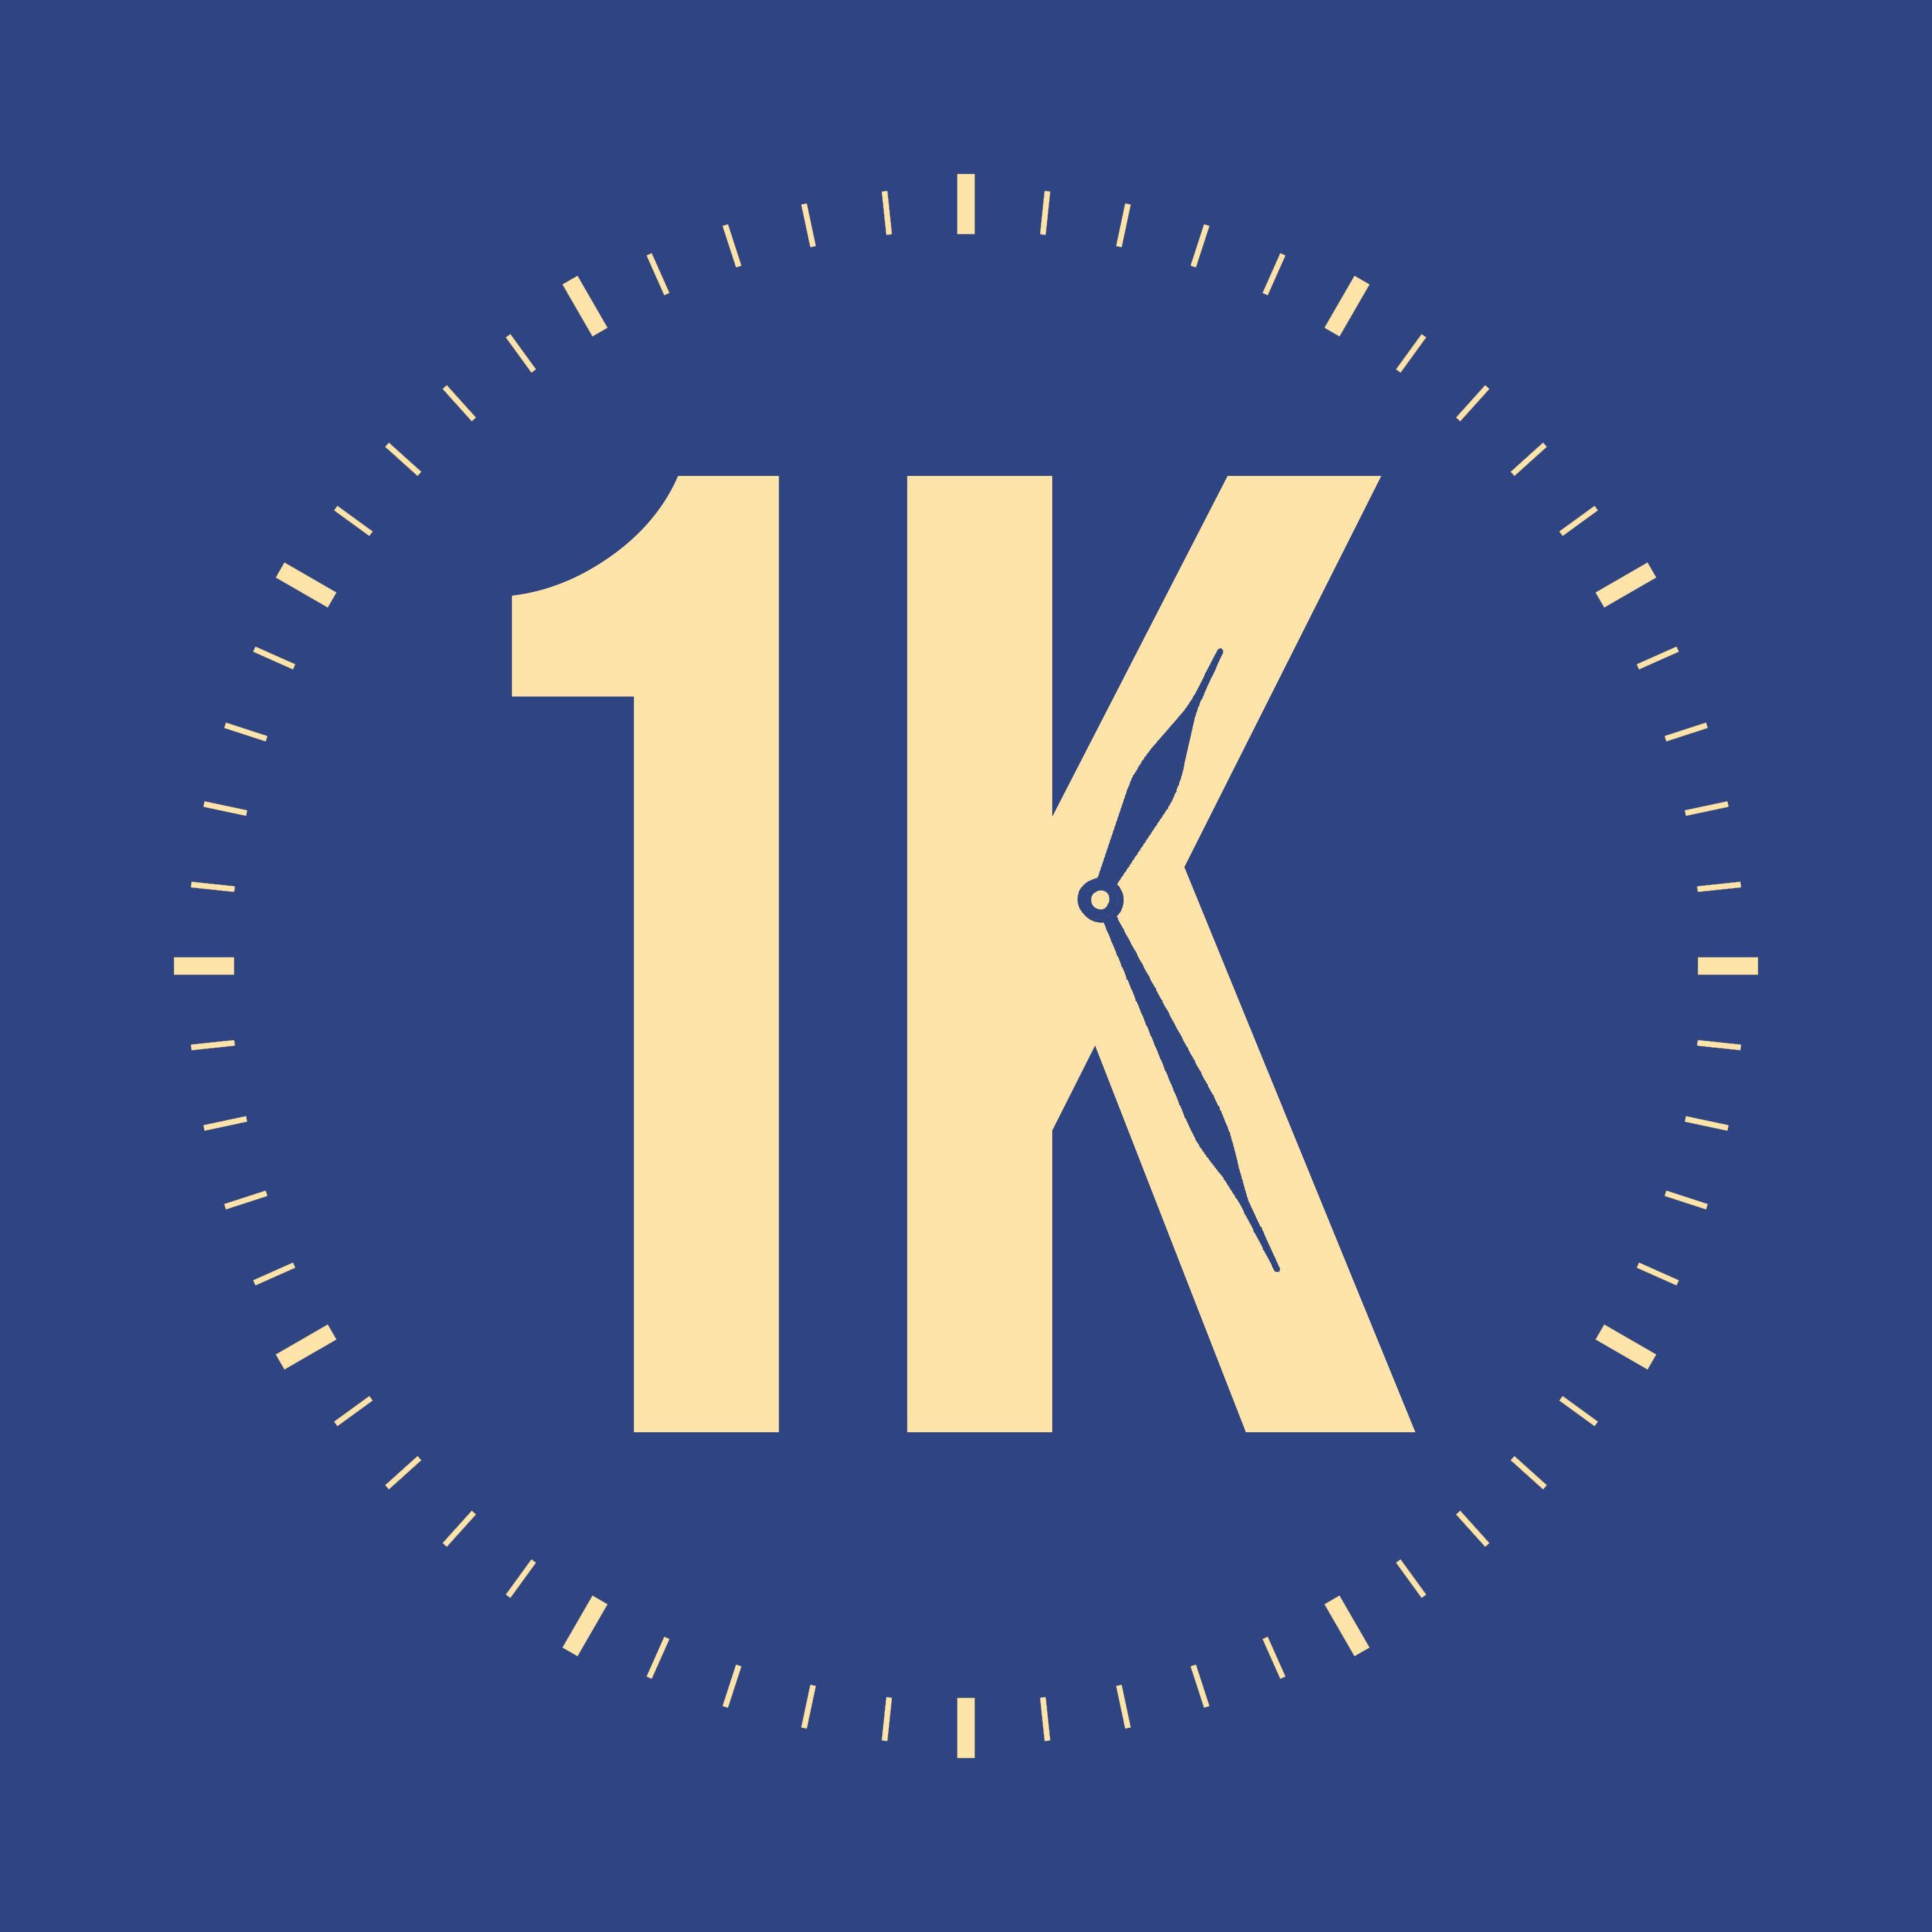 1K Logo - 1K: The 1,000 Second Interview Podcast on Apple Podcasts